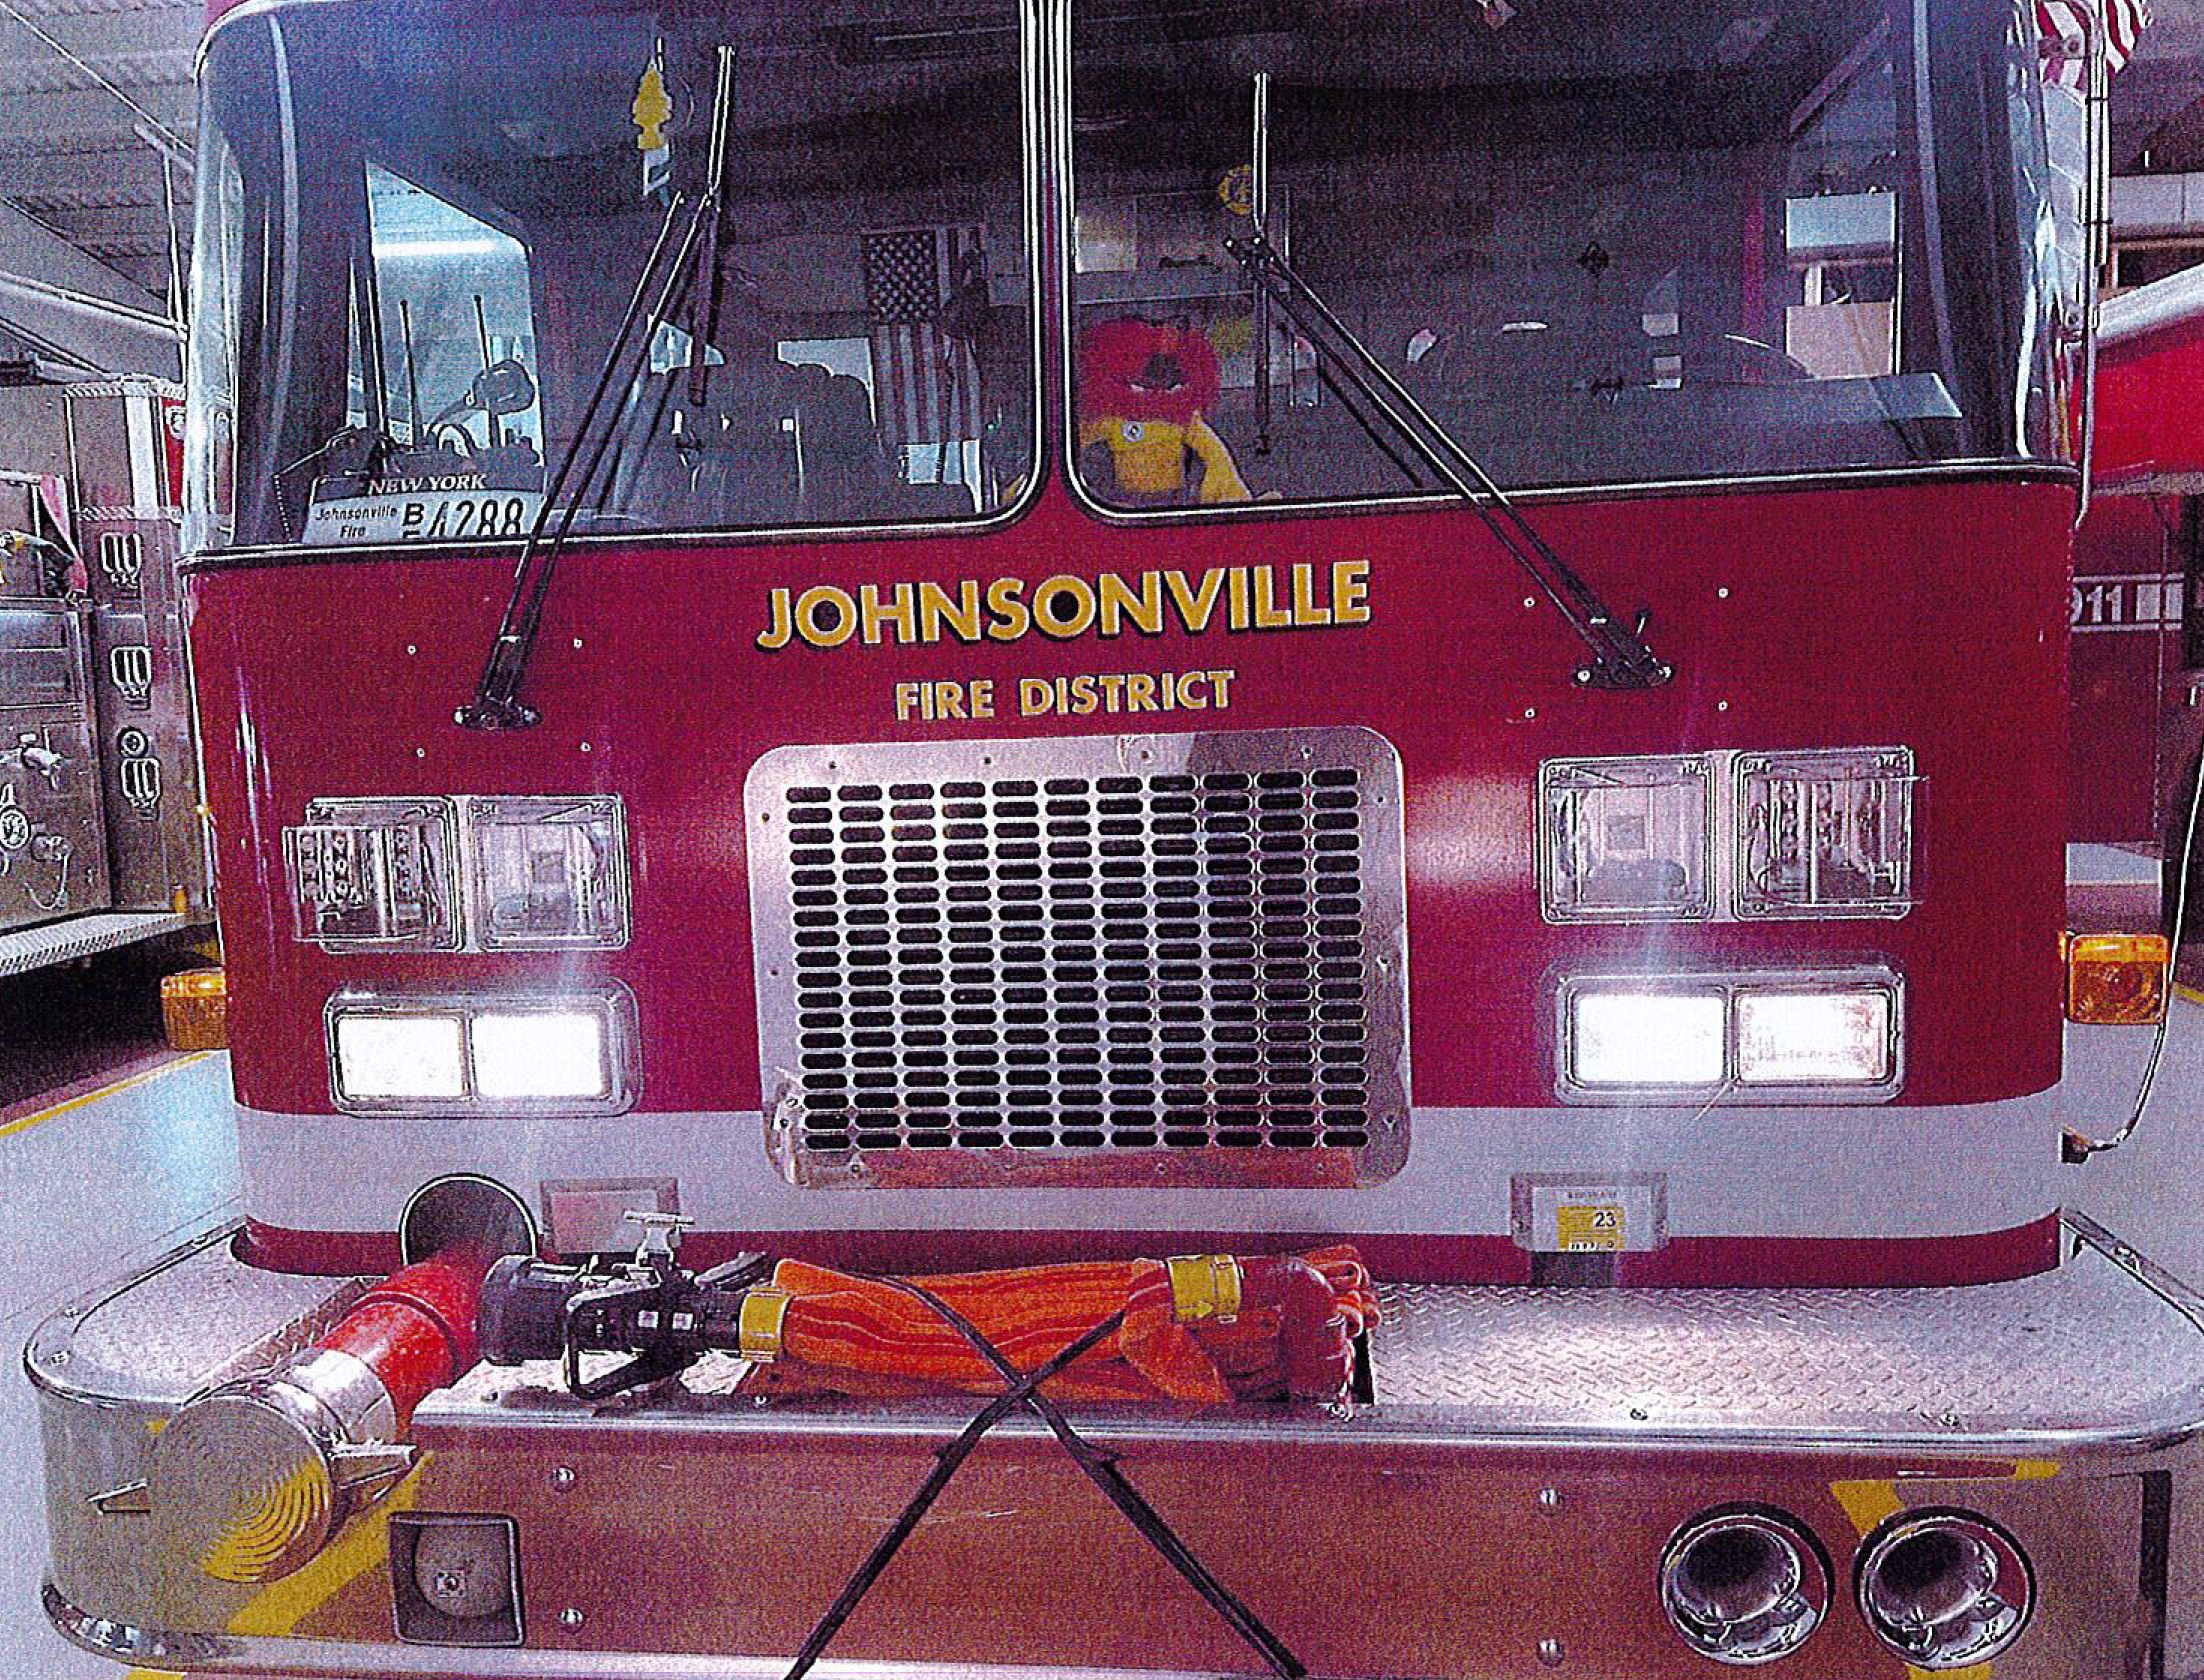 red fire truck reads Johnsonville fire district on front